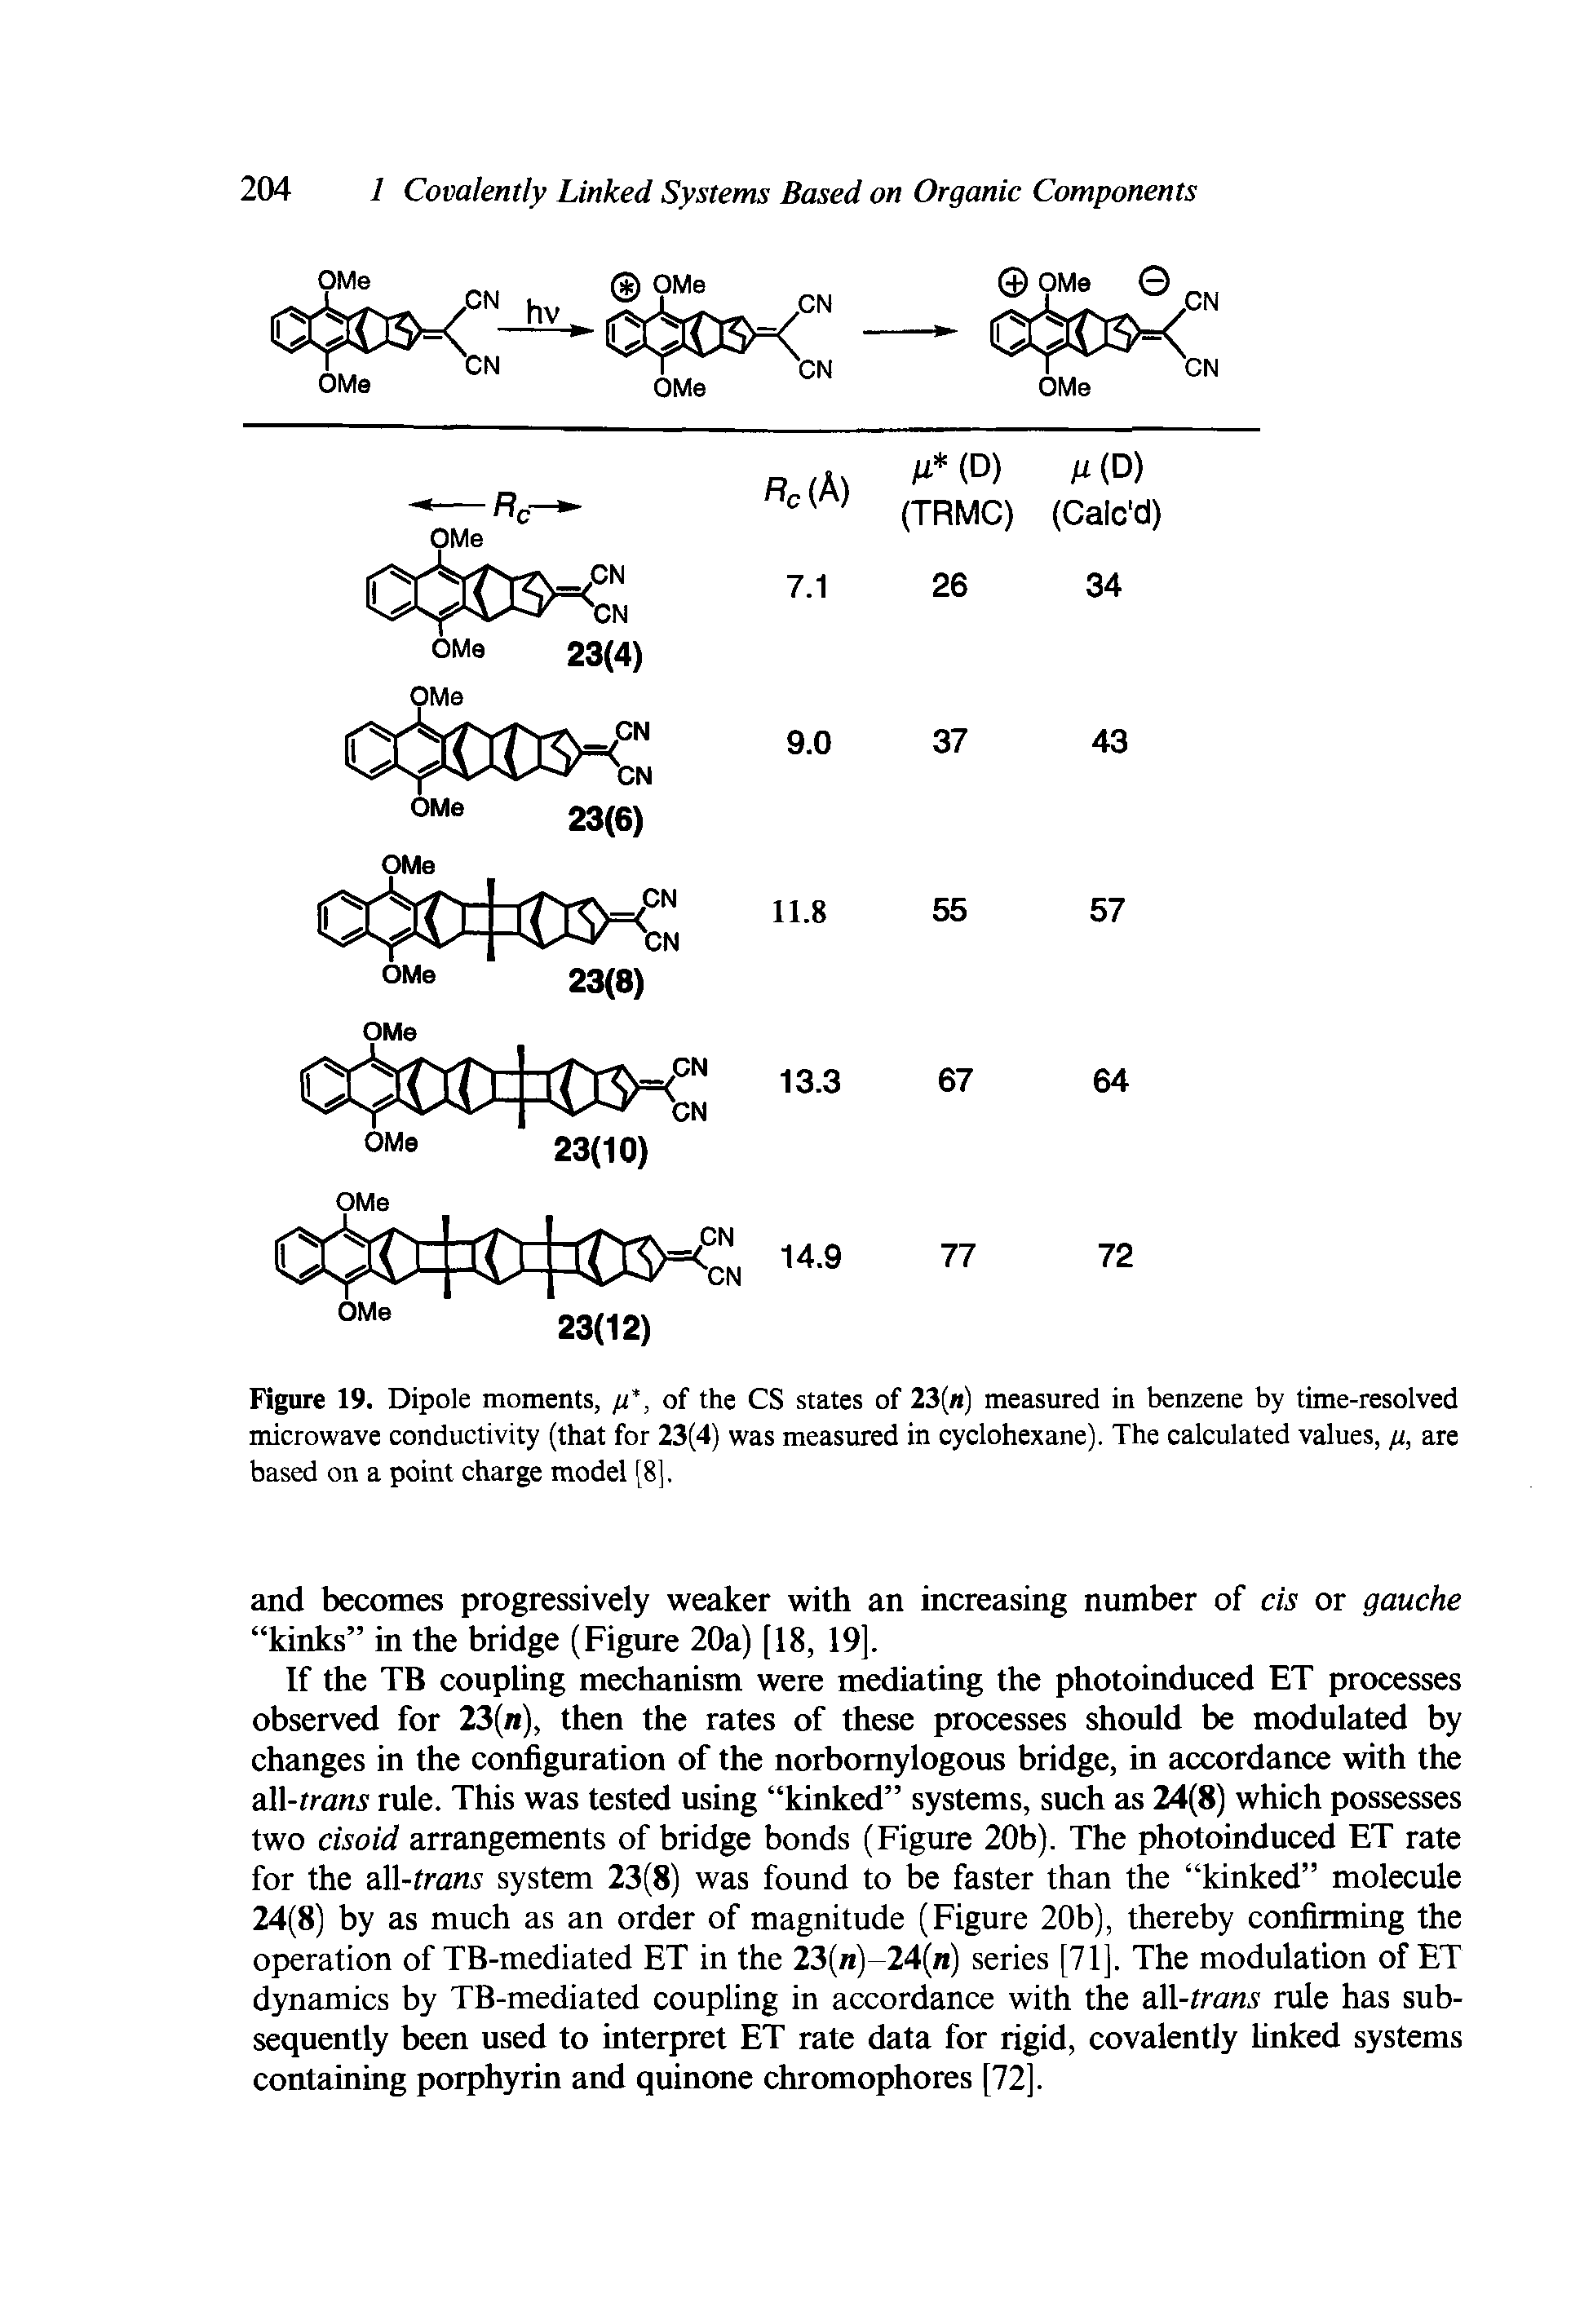 Figure 19. Dipole moments, p, of the CS states of 23( ) measured in benzene by time-resolved microwave conductivity (that for 23(4) was measured in cyclohexane). The calculated values, p, are based on a point charge model [8],...